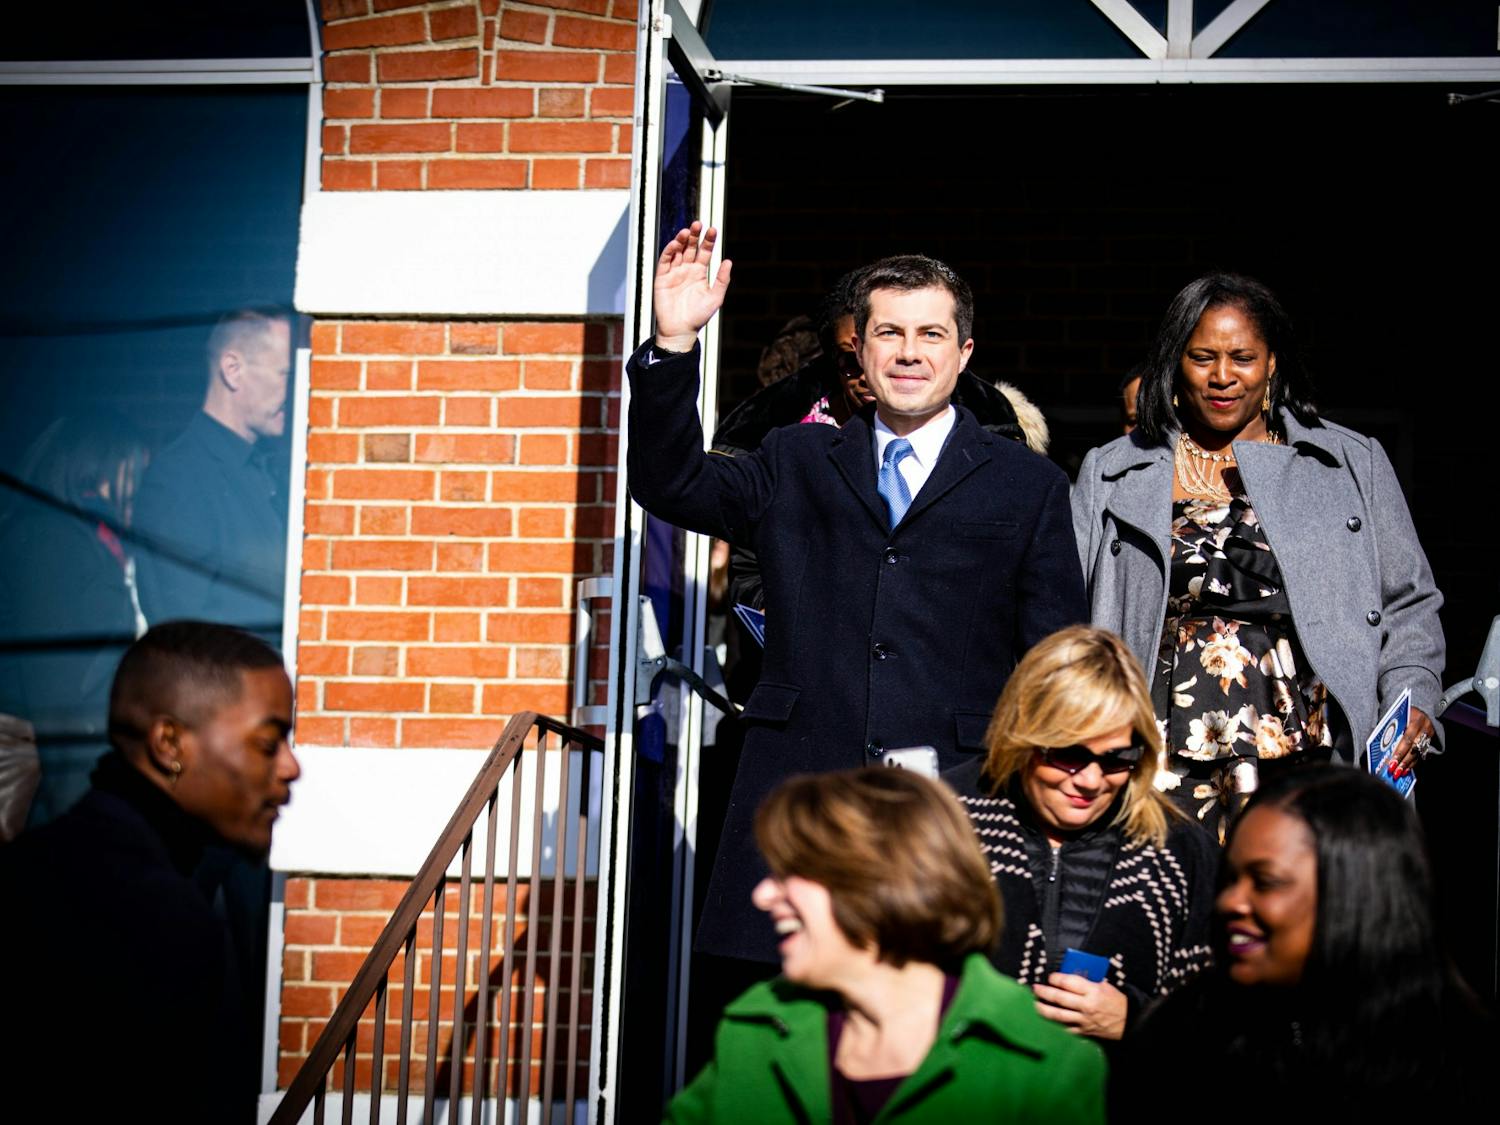 Mayor Pete Buttigieg walking to join the King Day at the Dome rally at Zion Baptist Church on Martin Luther King Jr. Day Jan. 20.